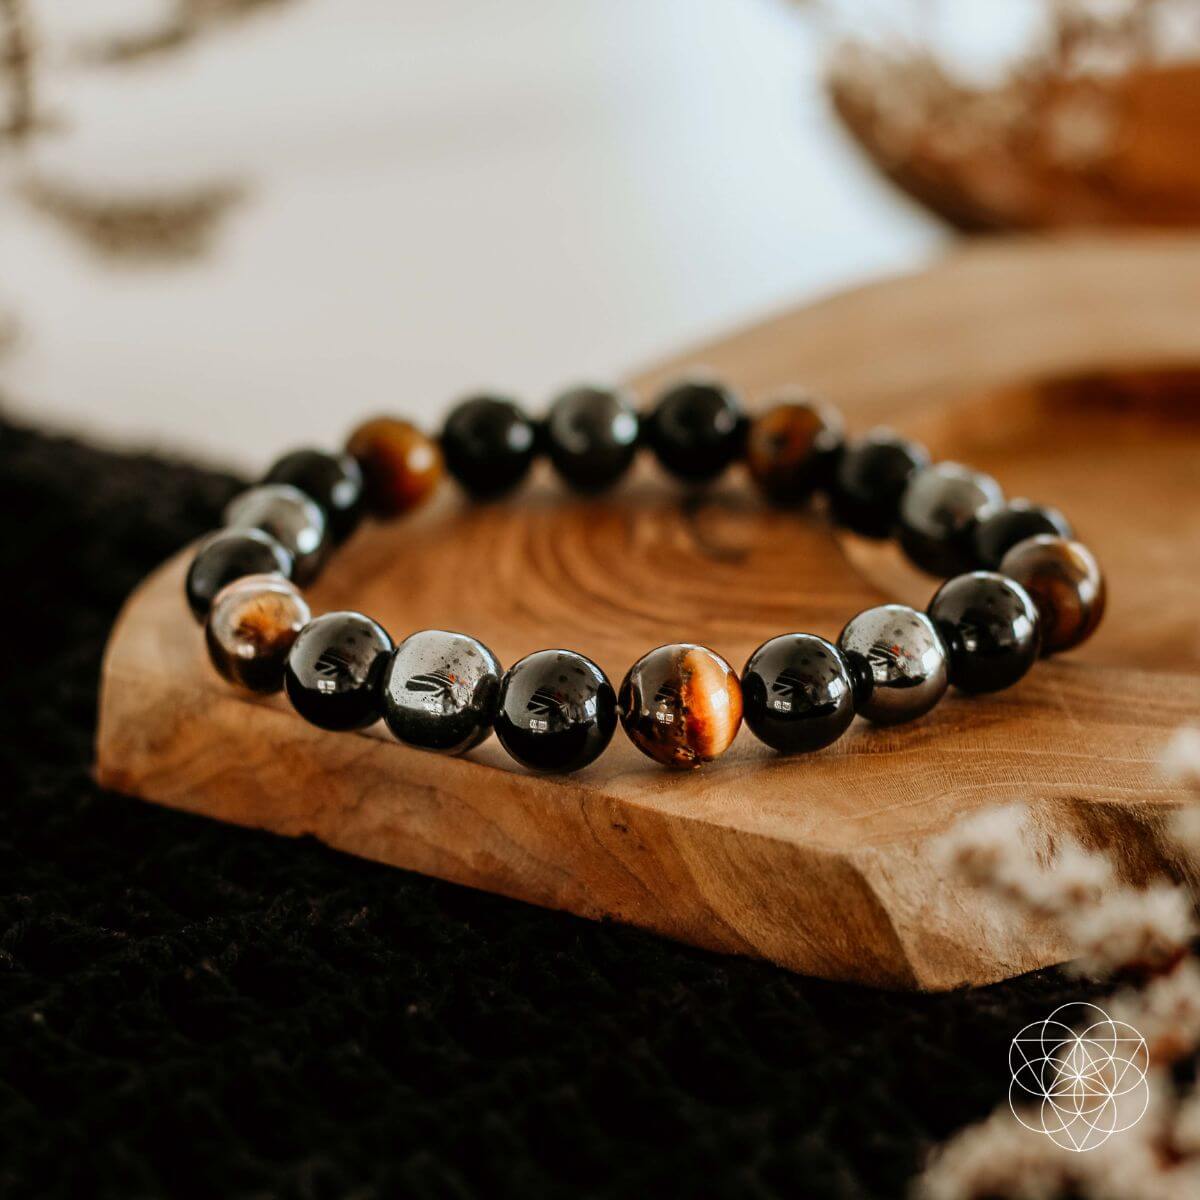 Best Protection Bracelet for Protection and Energy Clearing | everlur